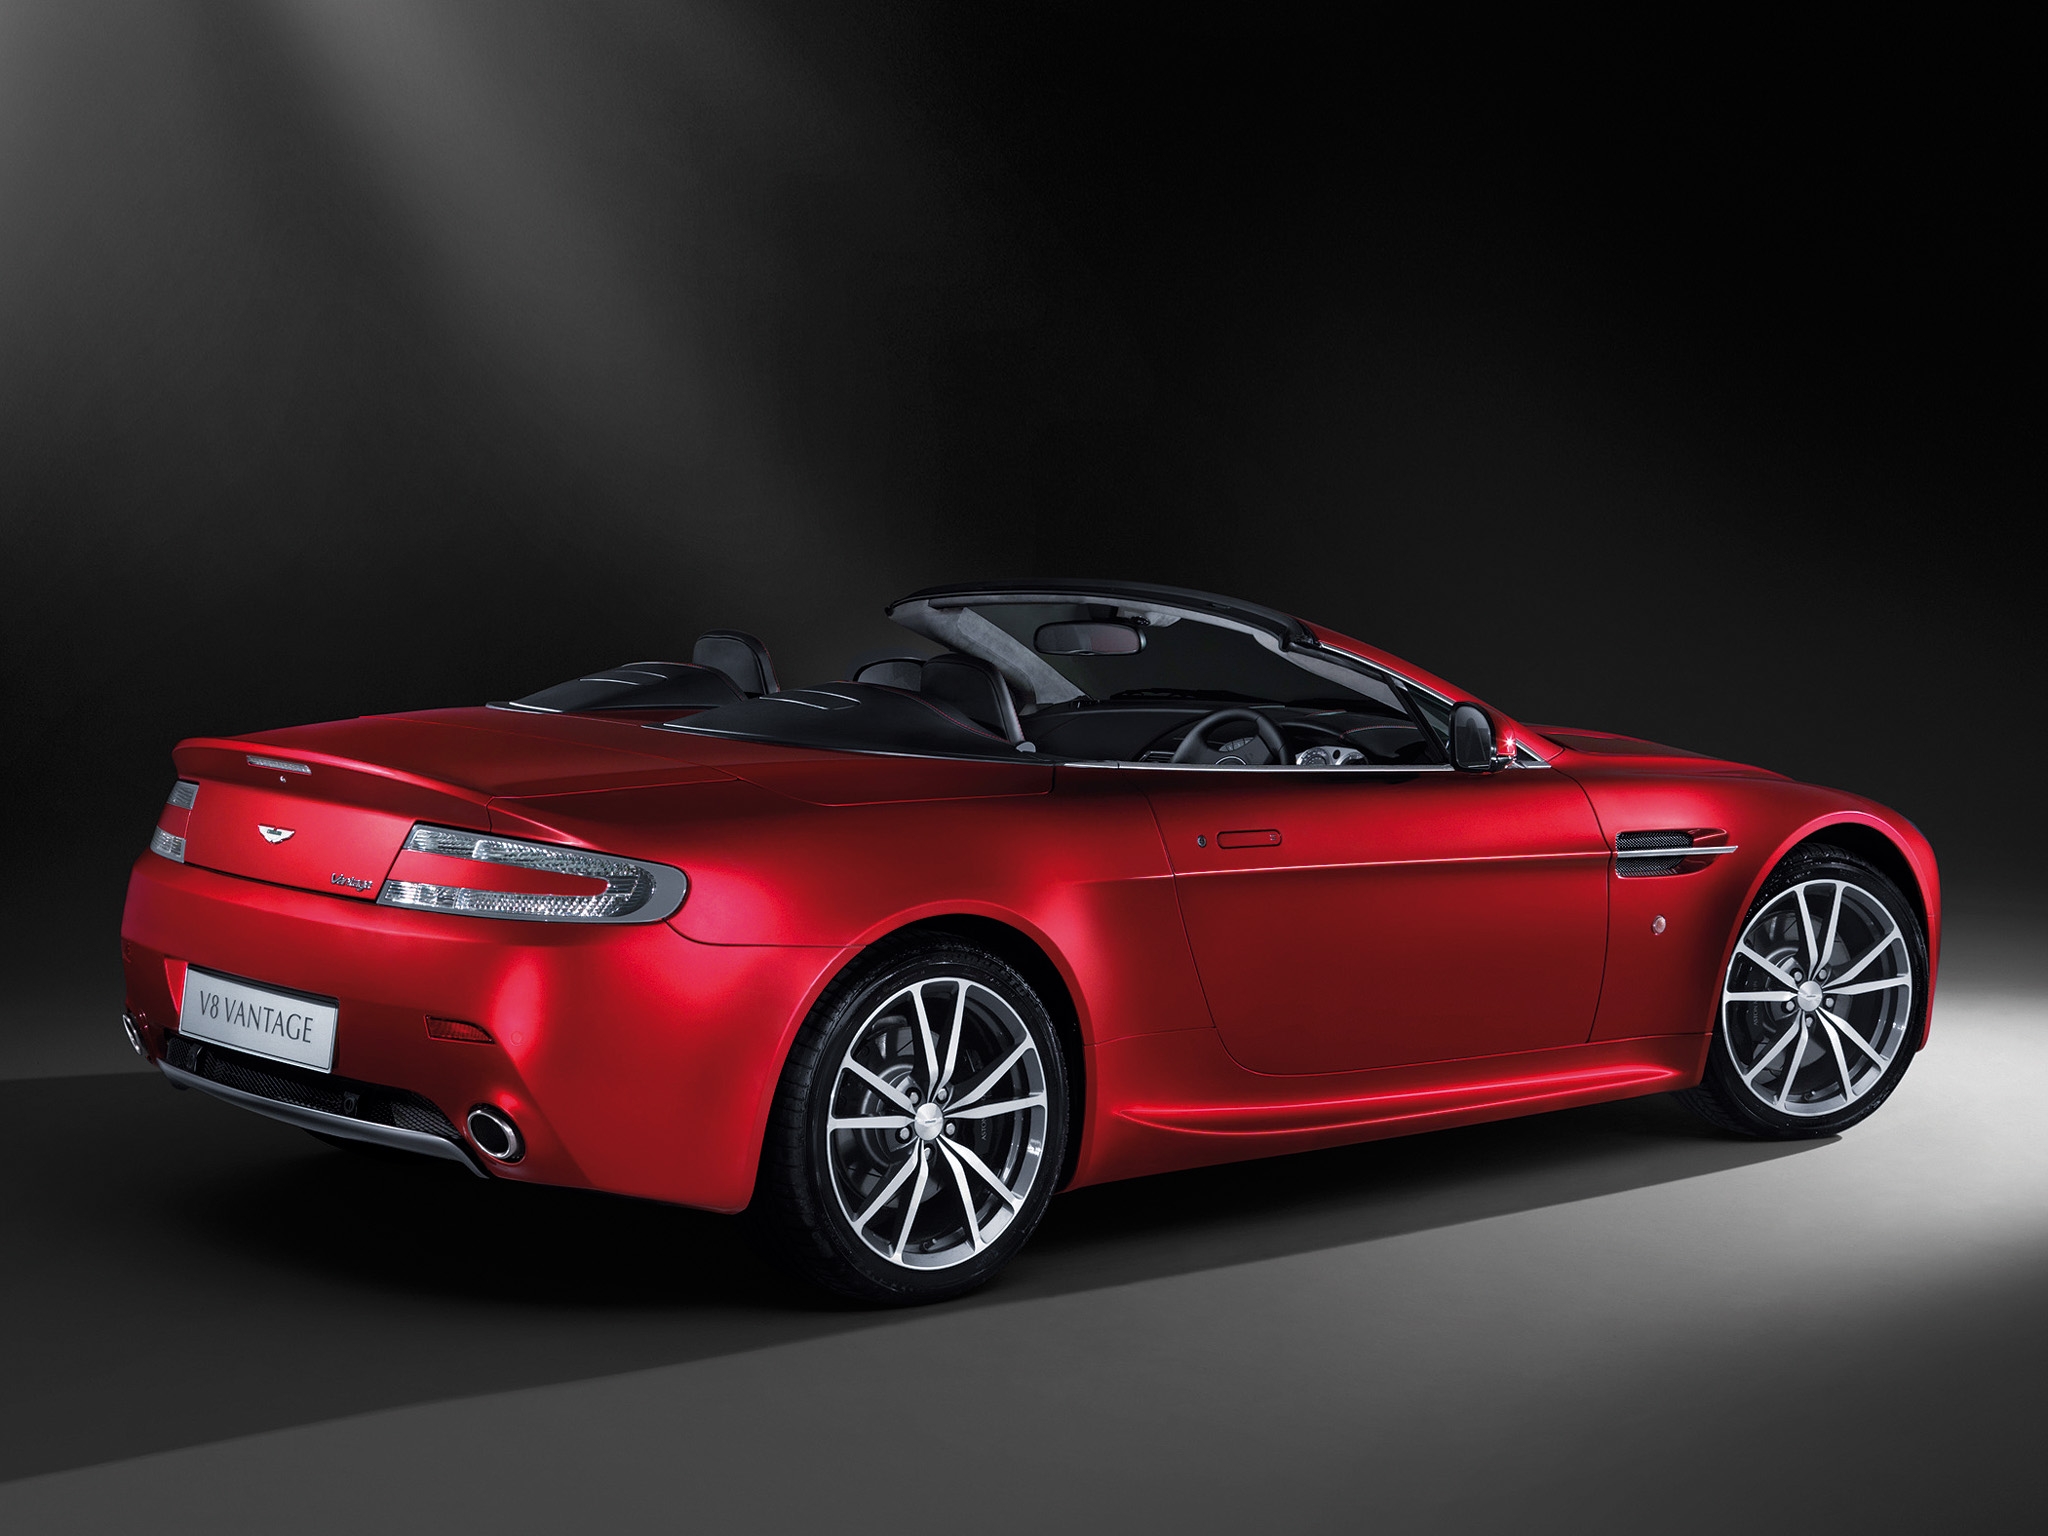 aston martin, cars, red, side view, style, cabriolet, 2008, v8, vantage